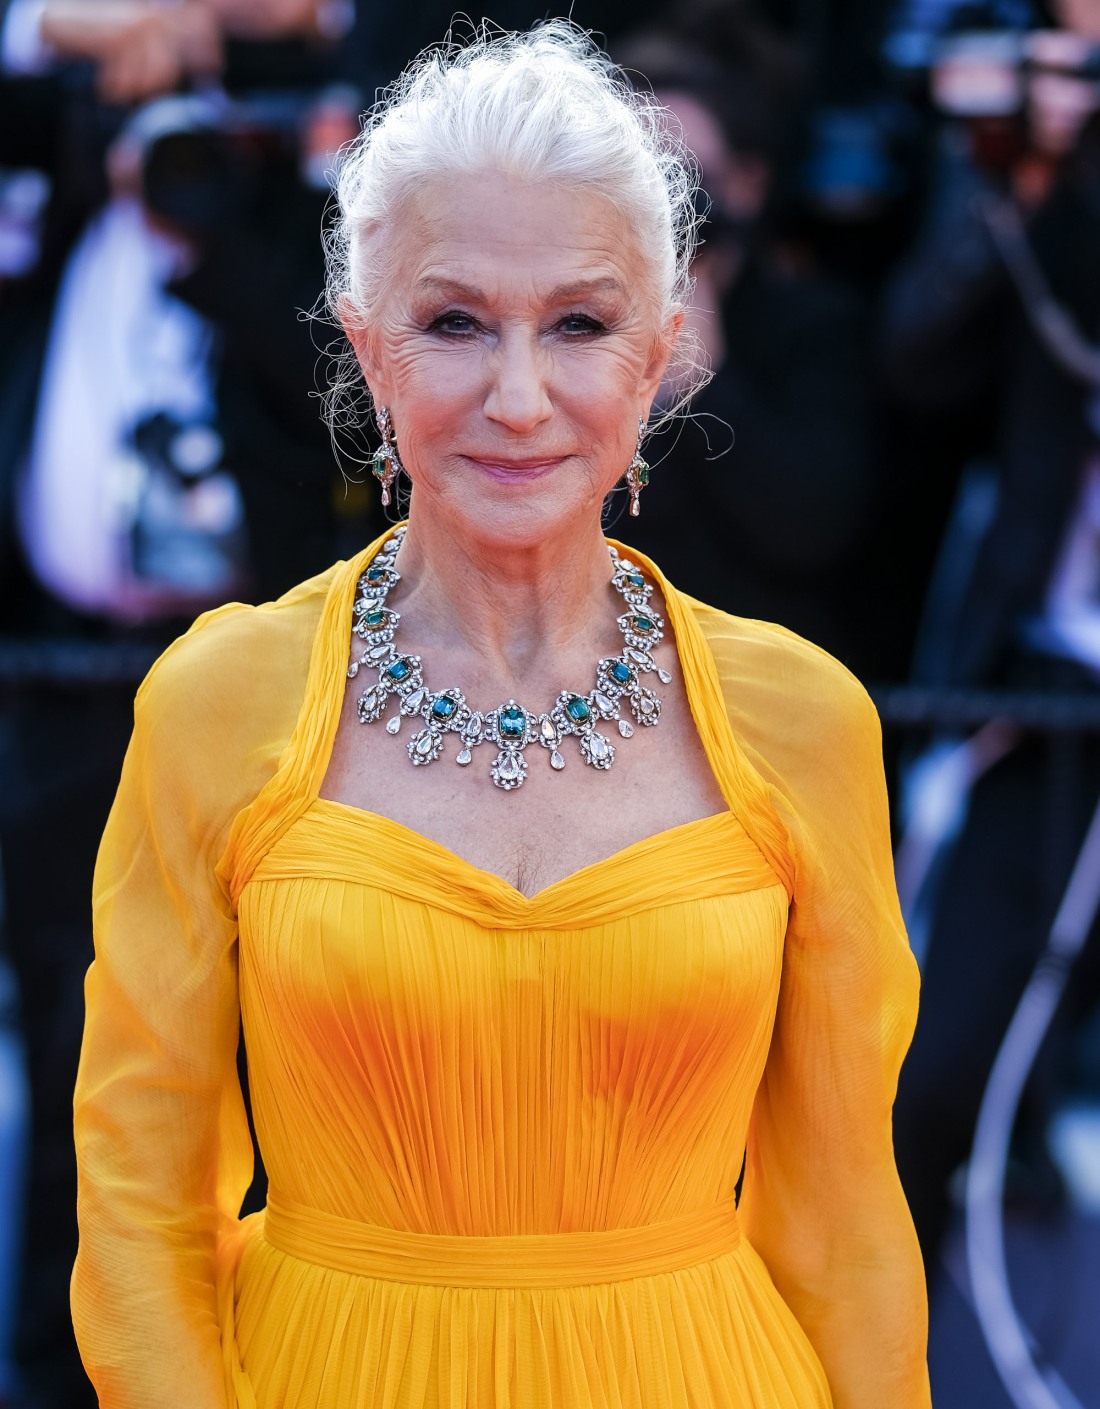 Helen Mirren poses at the Red Carpet for the Opening Night Film - Annettee during the 74th Cannes International Film Festival on Tuesday 6 July 2021